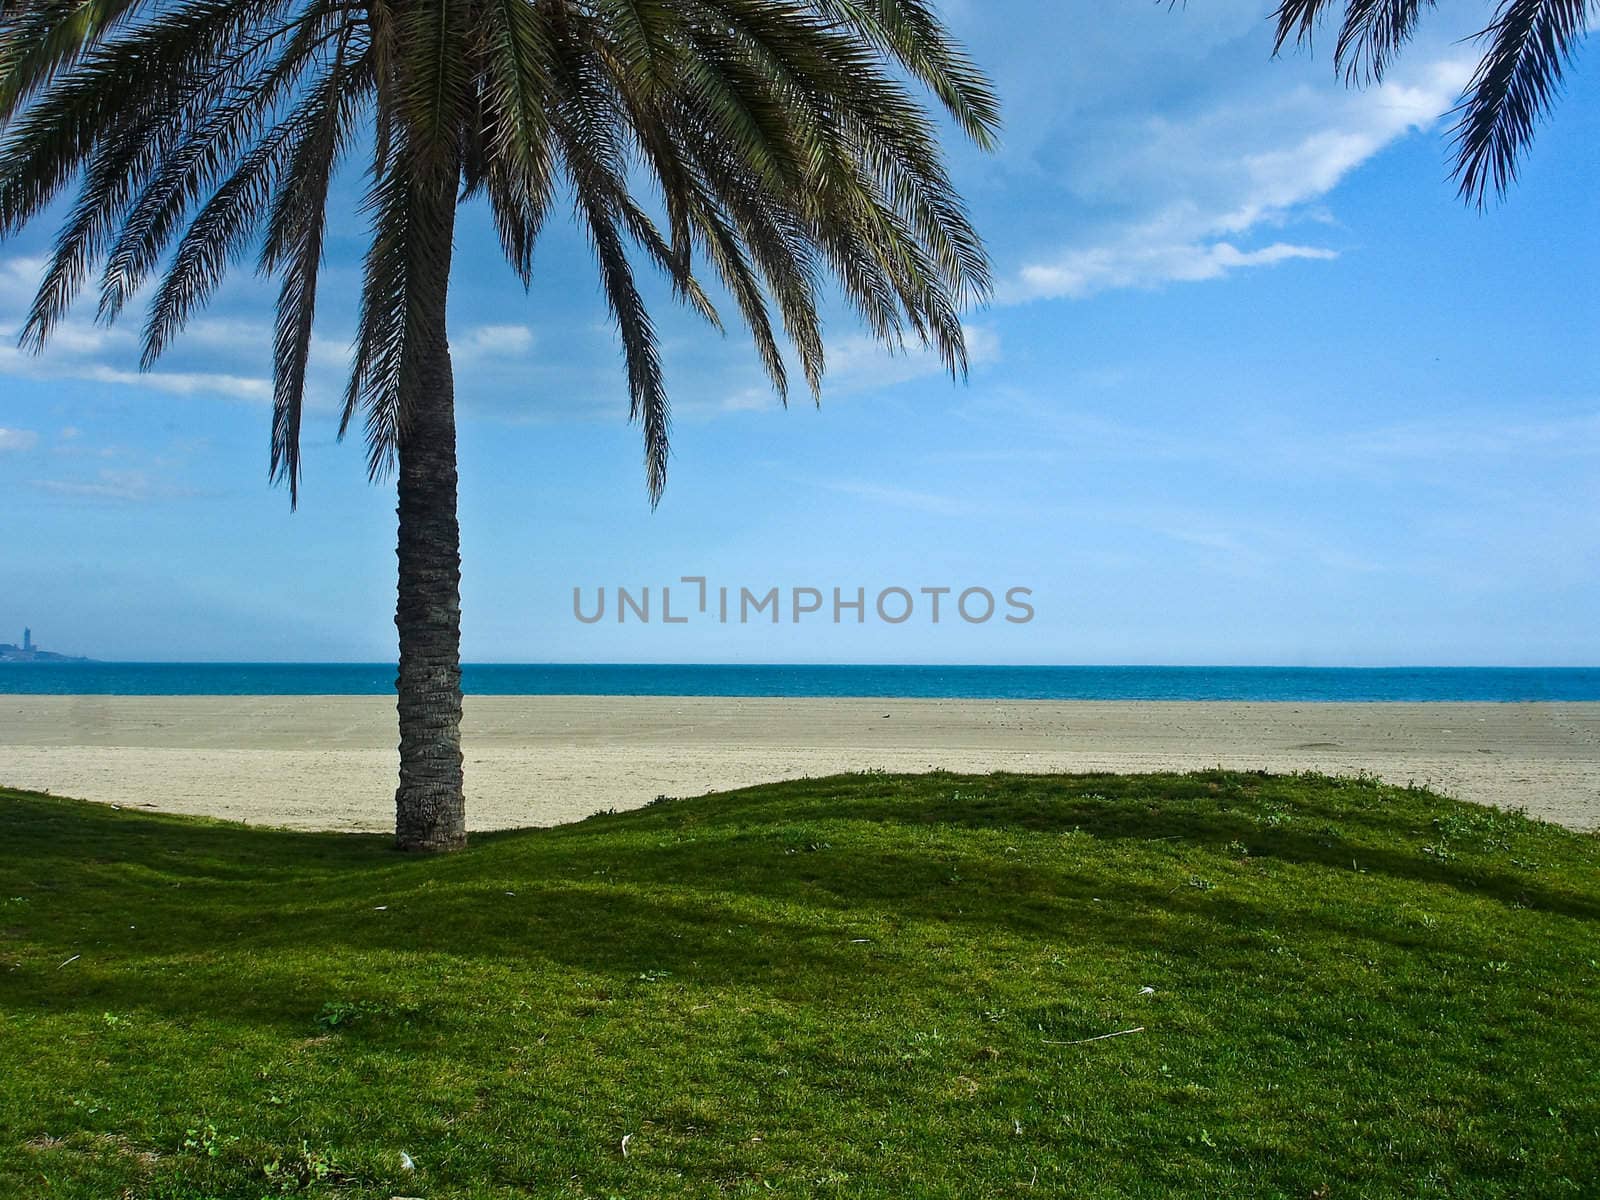  Beach and Sea View From Under a Palm Tree 2 by marimar8989